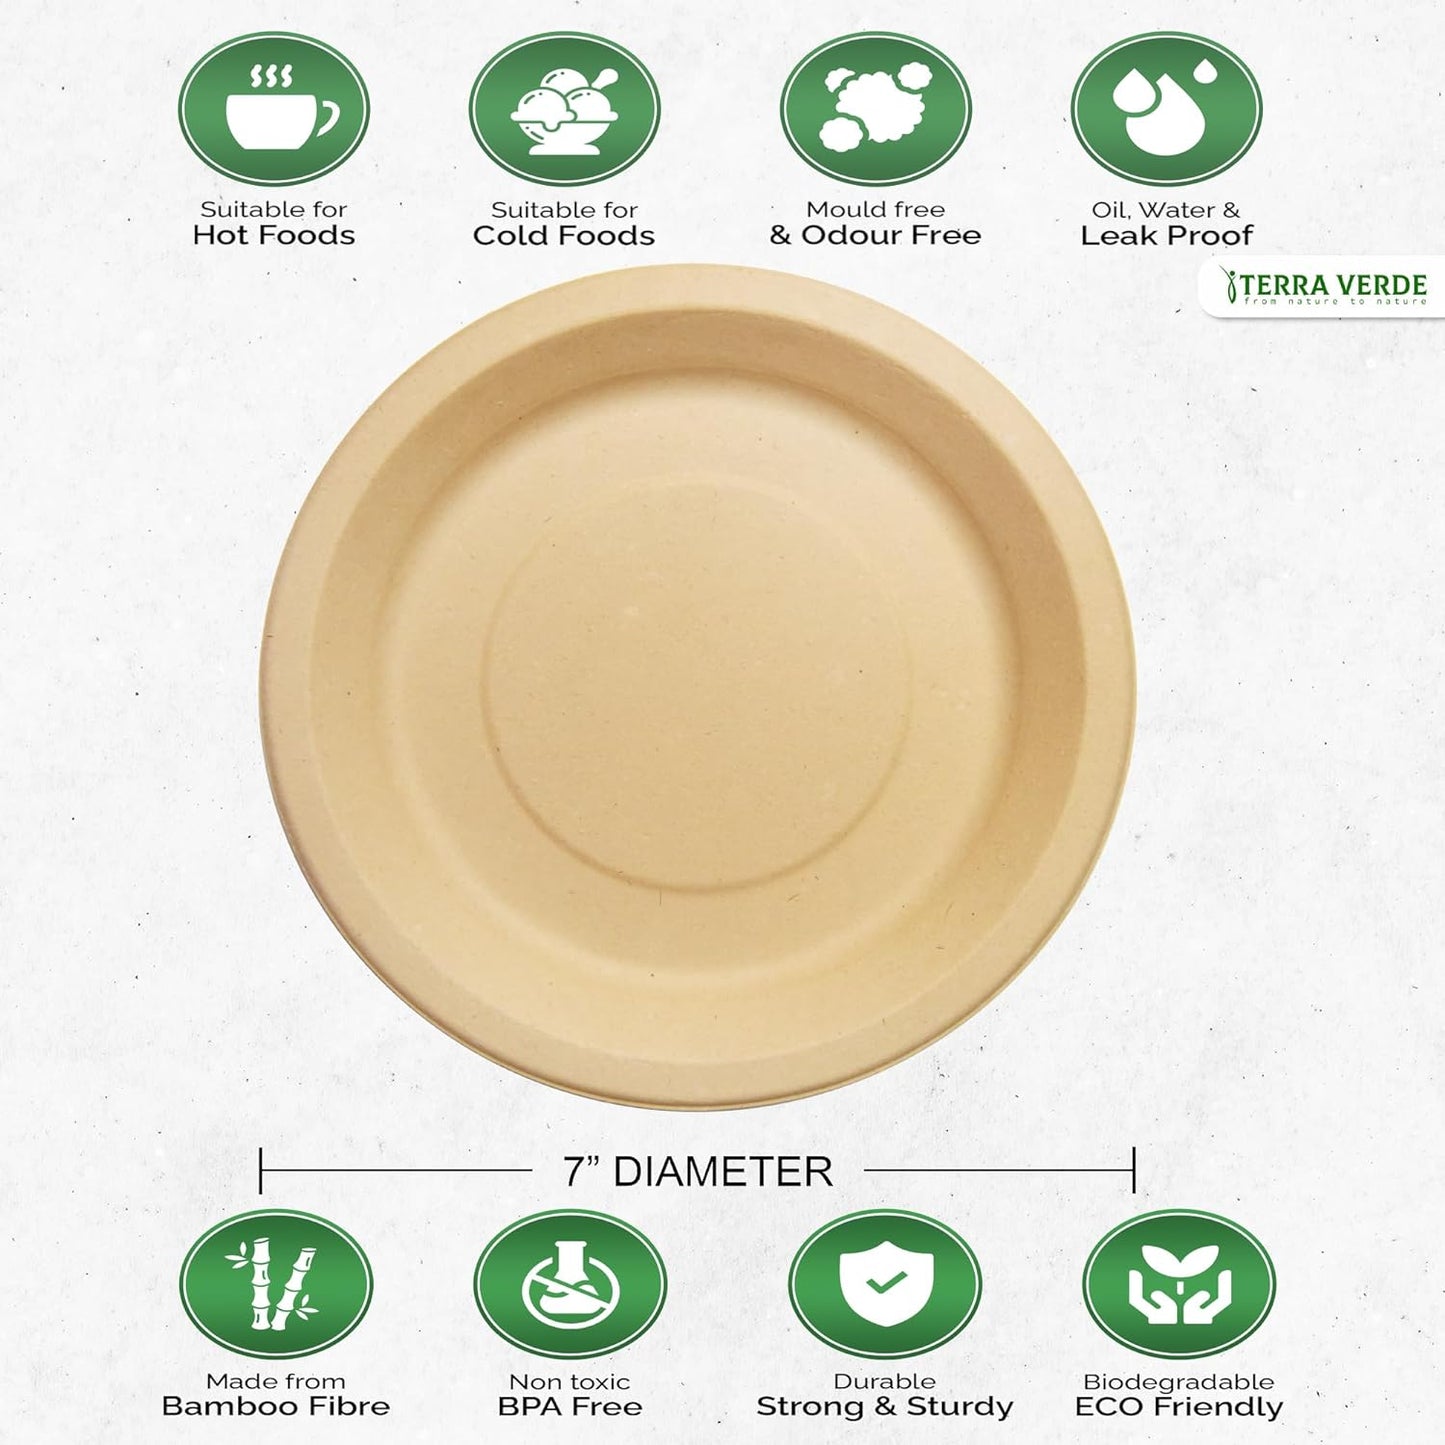 Disposable Bamboo Fibre Paper Plates l 7 inch (18cm) Round 50 Pack l Unbleached Natural Brown l 100% Compostable Eco Friendly Extra Strong Plate for Parties, Picnics, BBQ, Weddings